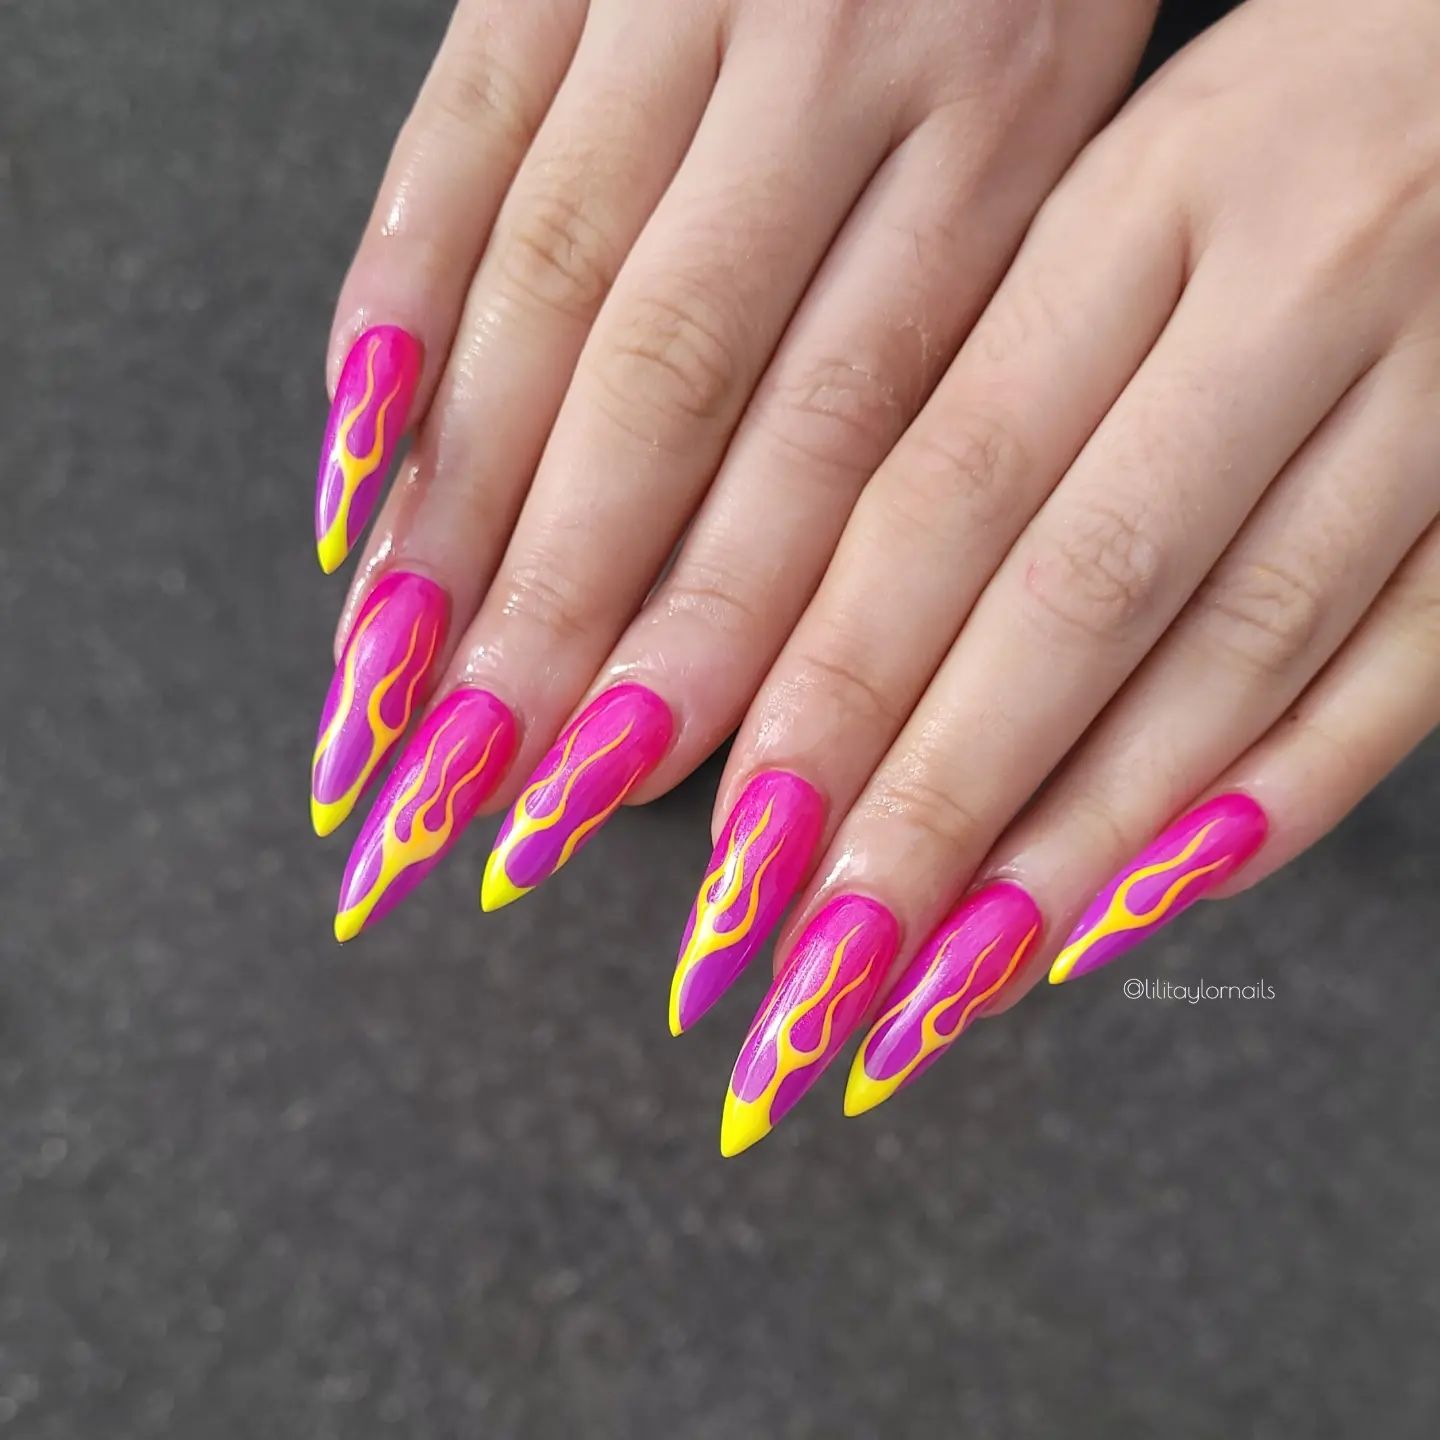 If you are looking for a flair to your outfit, go should go for these pinky flame nails. The pink nail polish gets darker to the tips and this looks quite amazing. Plus, yellow flames add these nails a greater look.